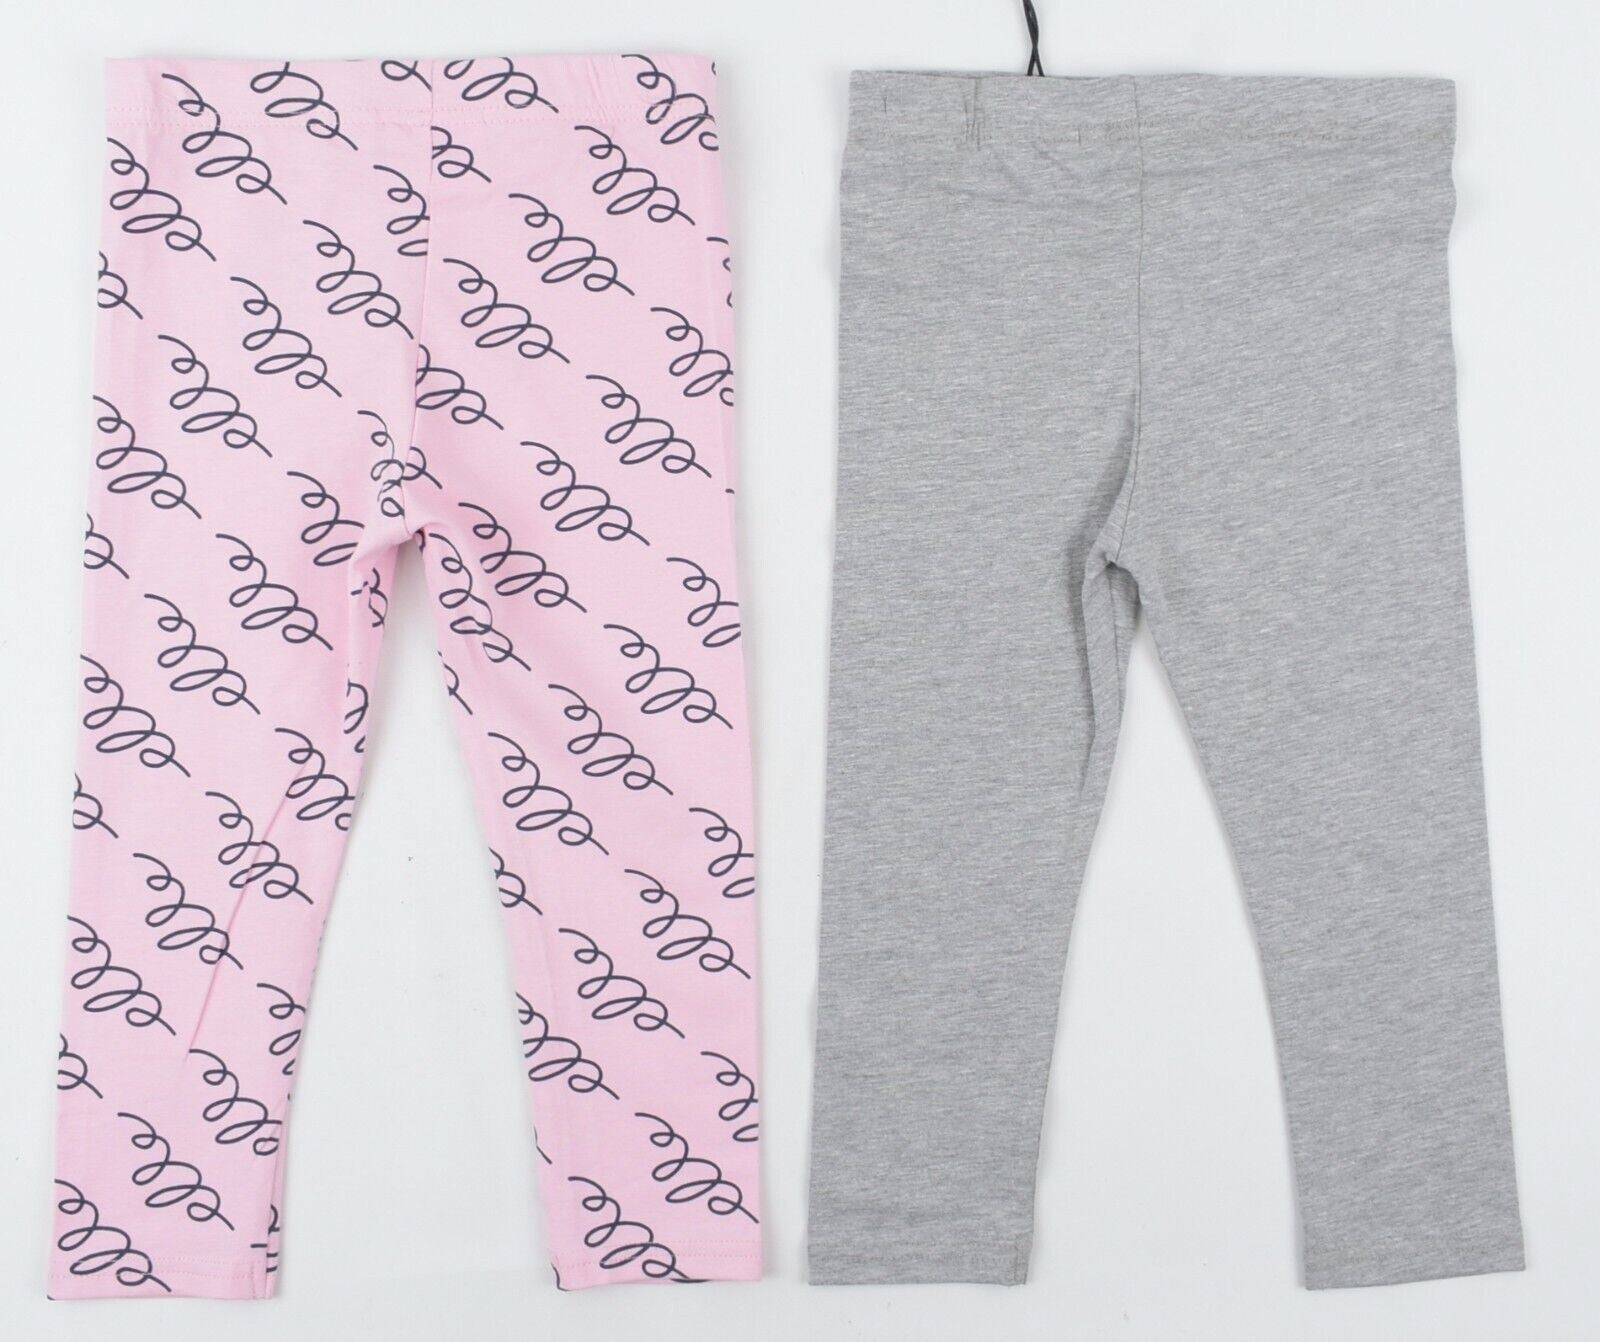 ELLE Girls Toddlers 2-pack Cotton Leggings, Pink/Grey, size 36 months